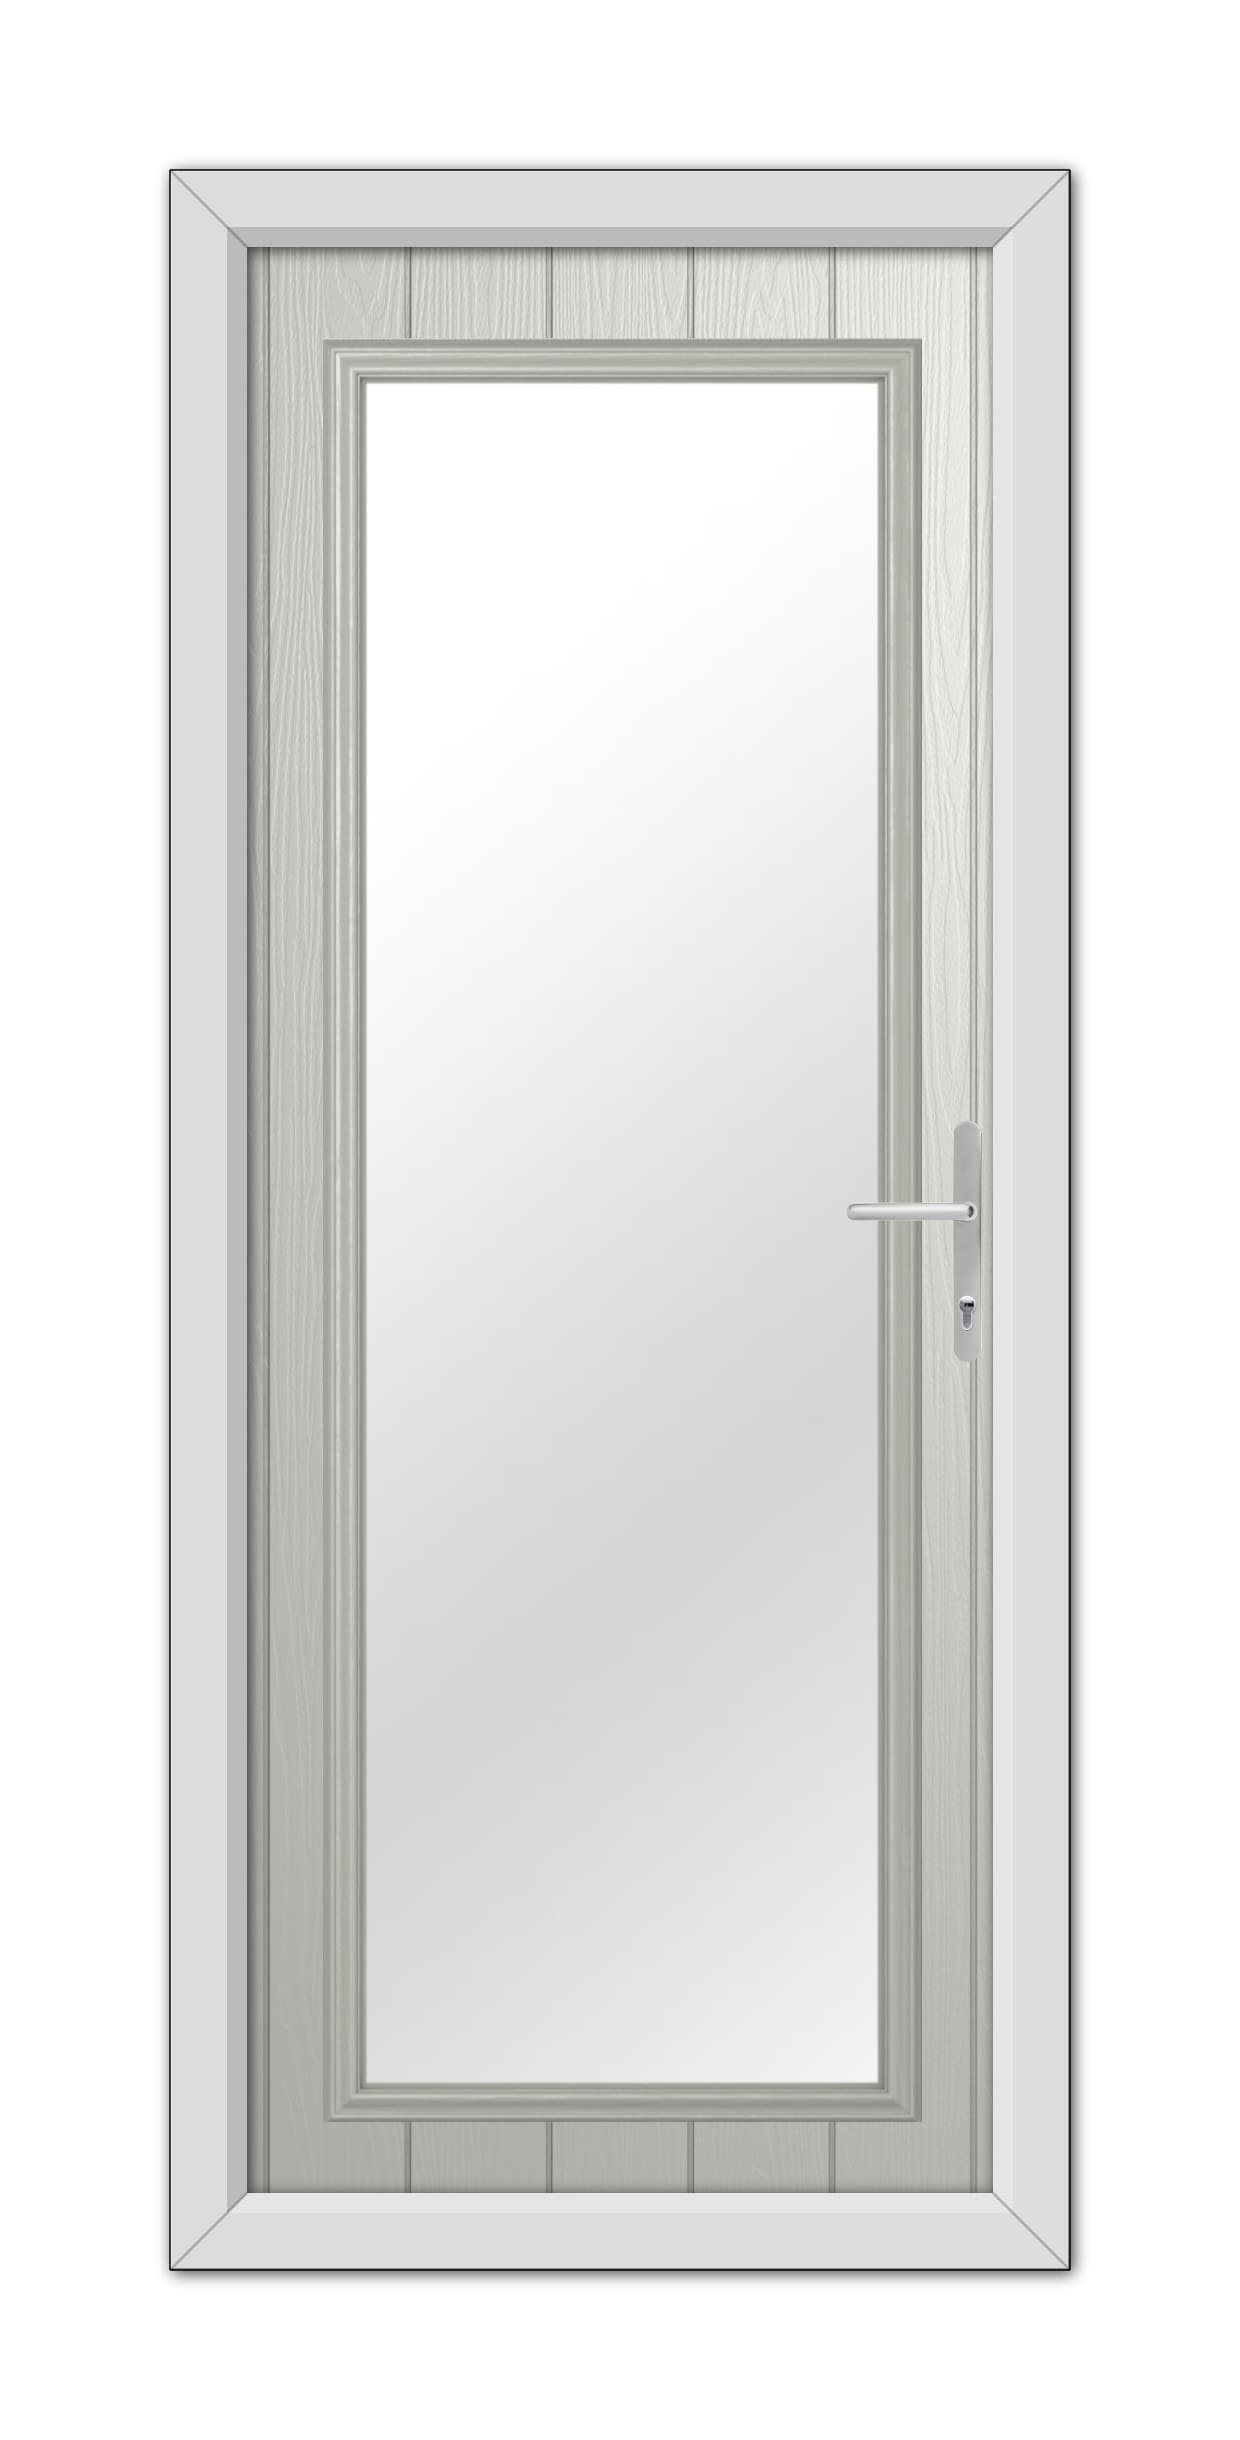 A modern Agate Grey Hatton Composite Door 48mm Timber Core with a clear rectangular glass panel, framed in white, and equipped with a silver handle on the right side.